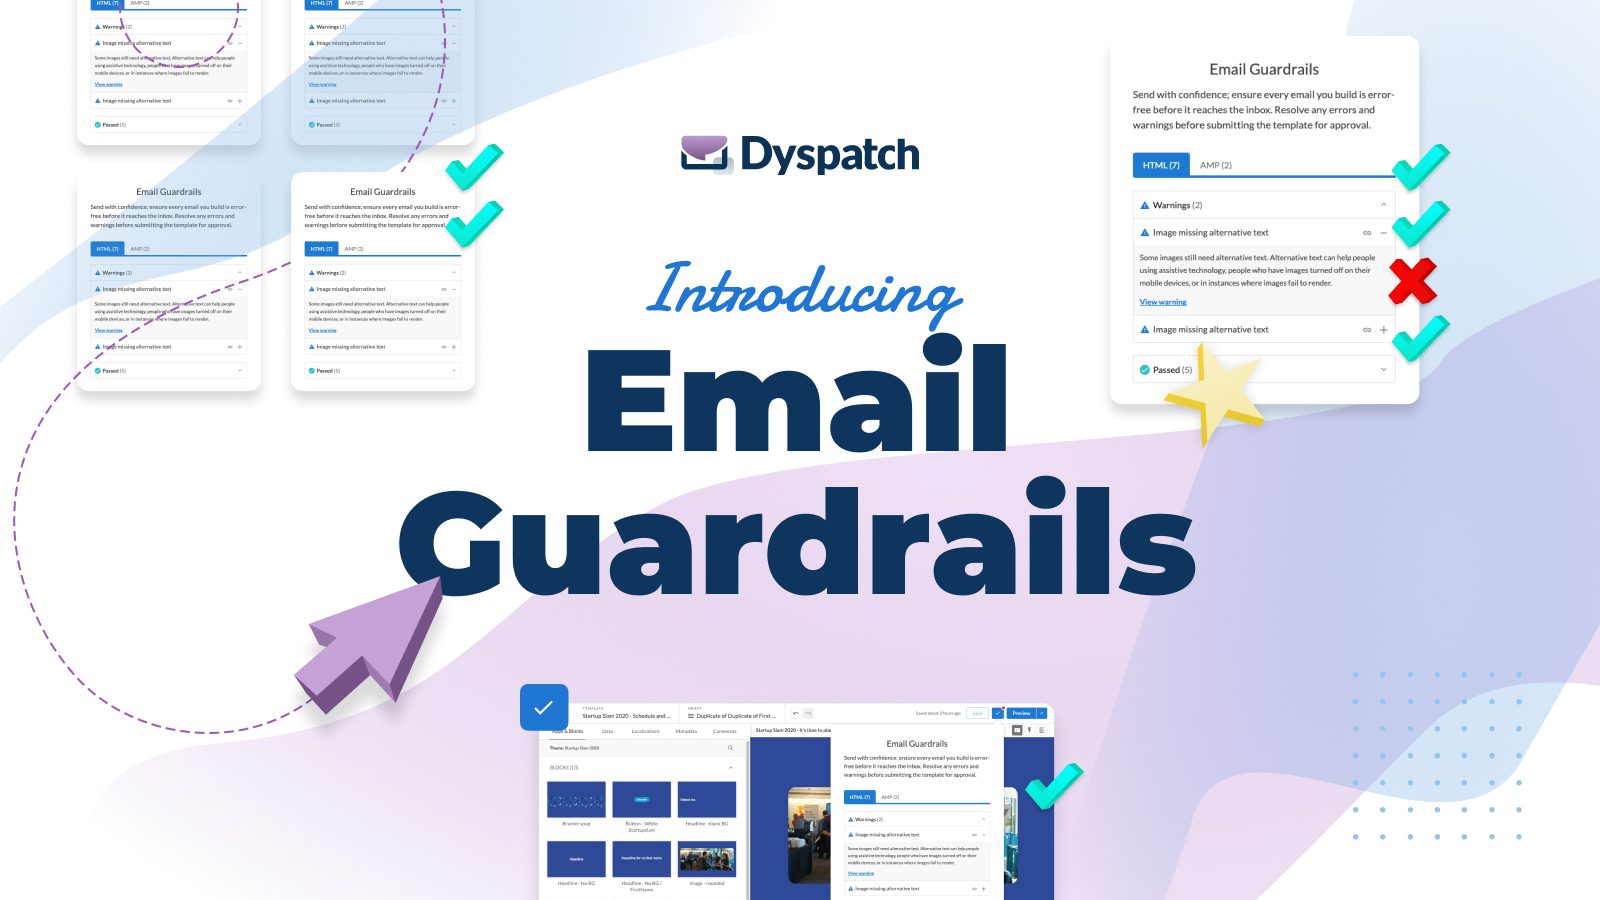 Introducing Email Guardrails